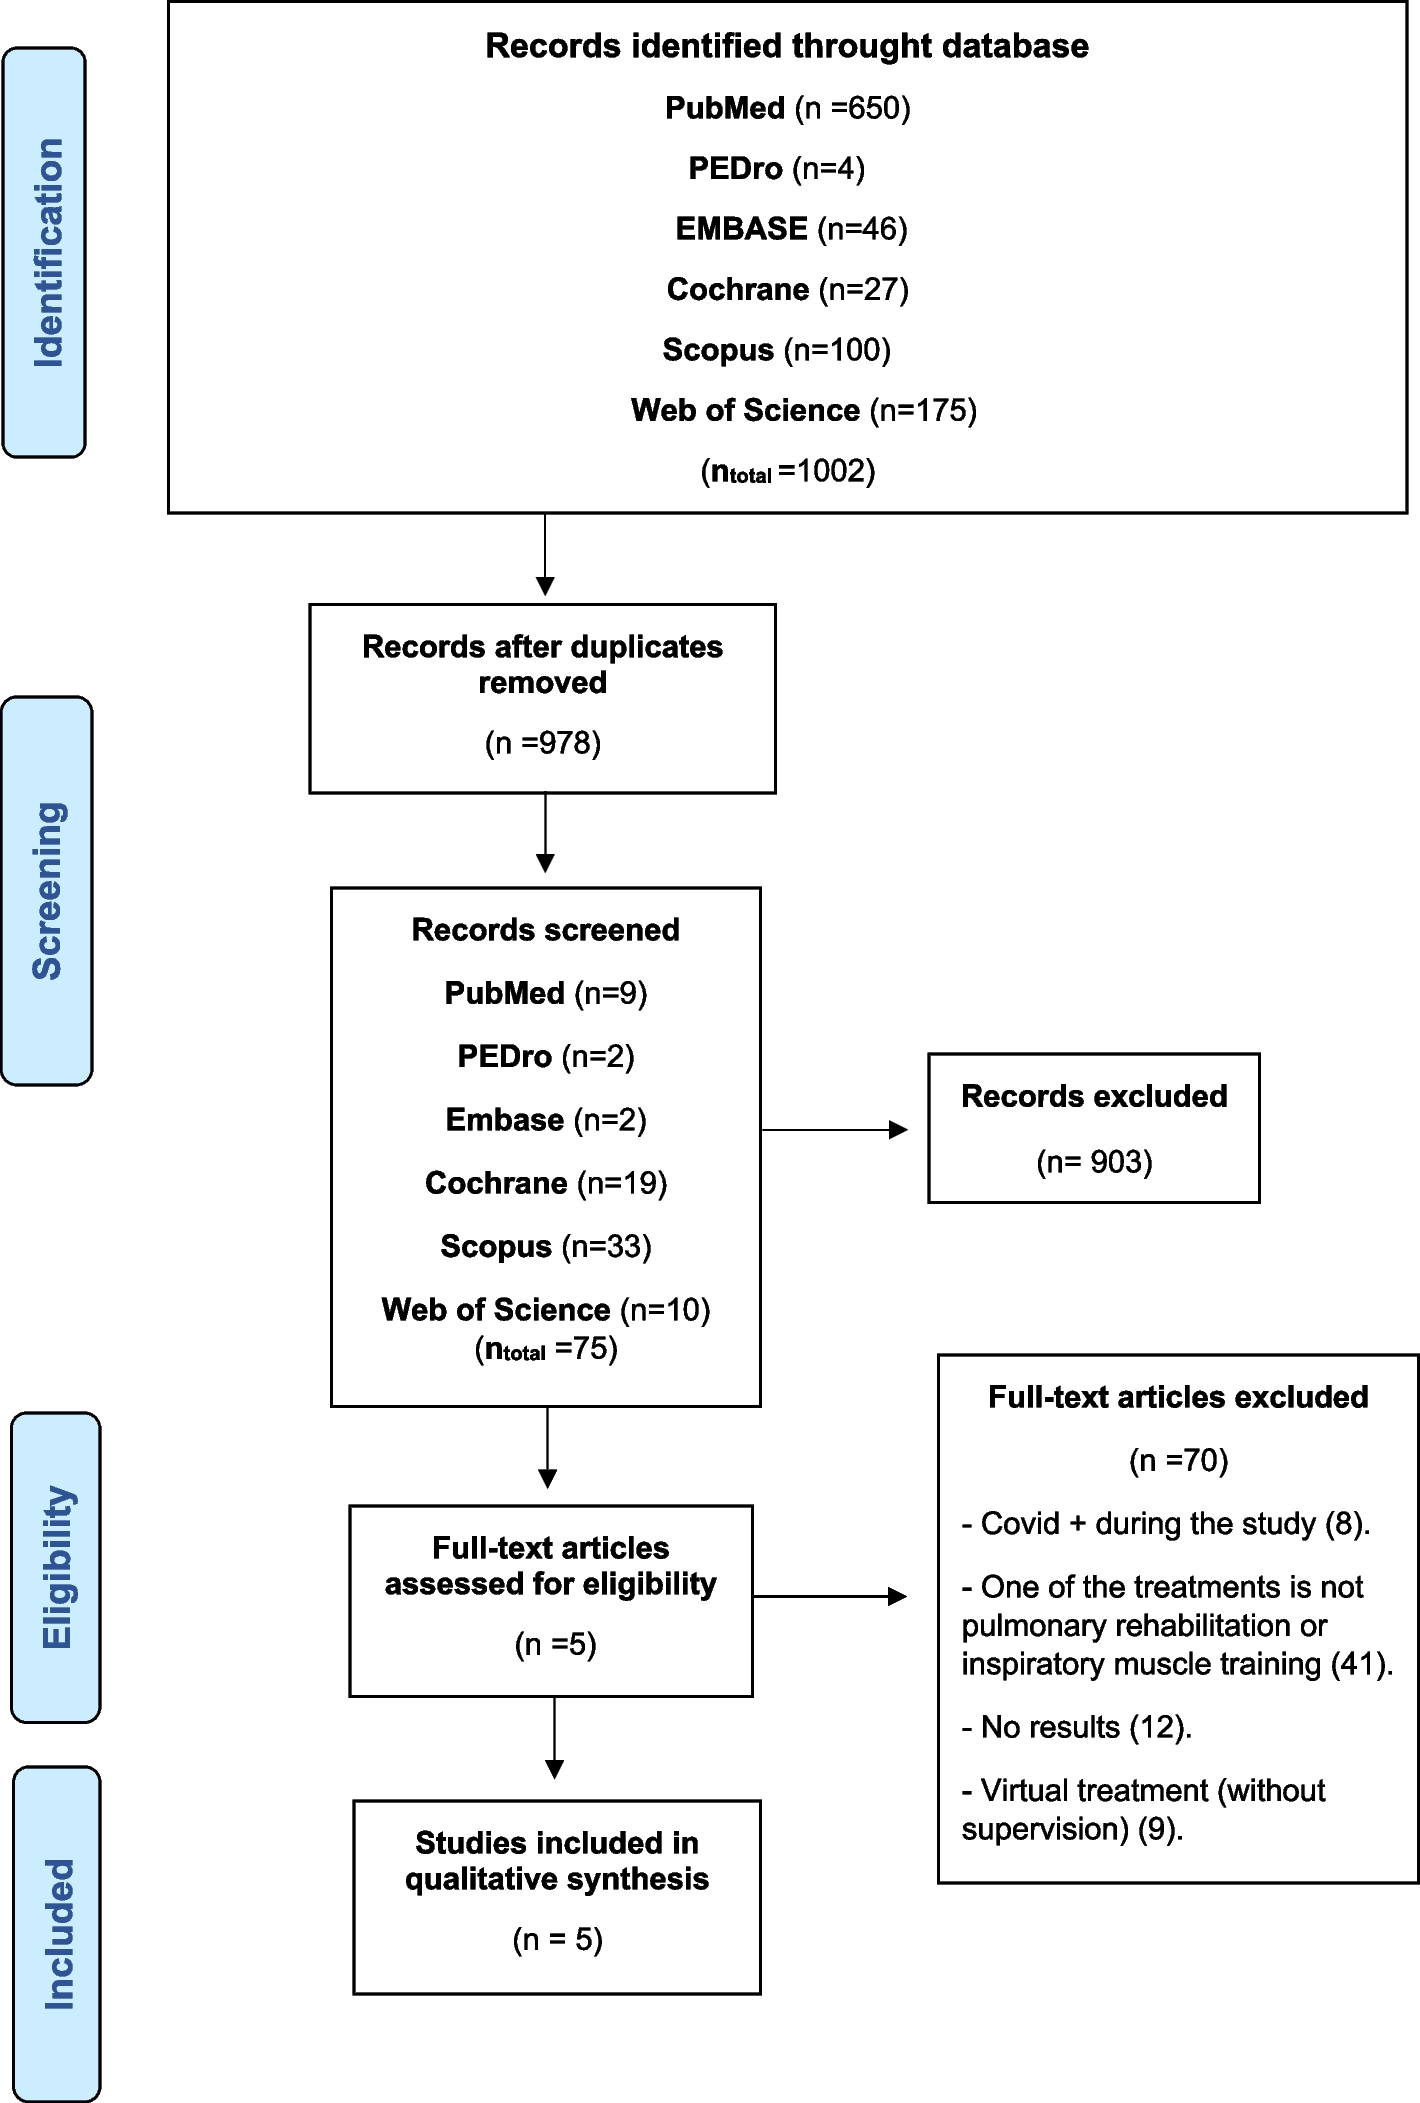 Effectiveness of pulmonary rehabilitation programmes and/or respiratory muscle training in patients with post-COVID conditions: a systematic review